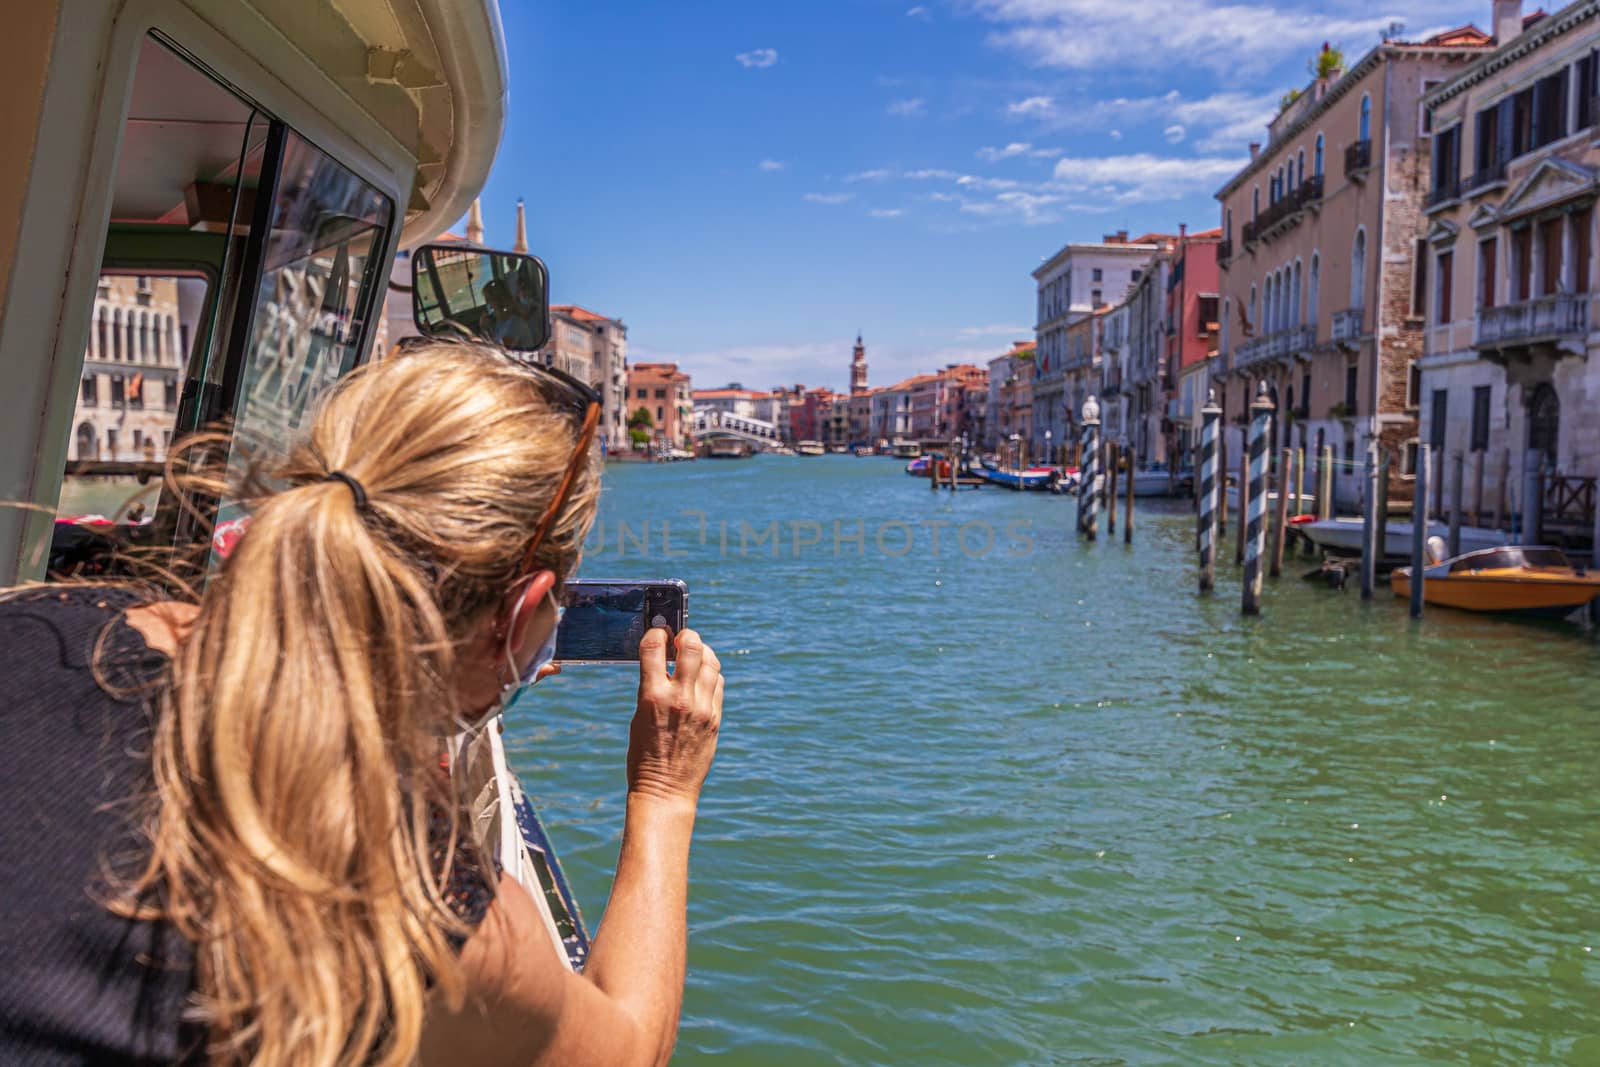 Woman with face mask taking picture of Grand canal in Venice, Italy by COffe